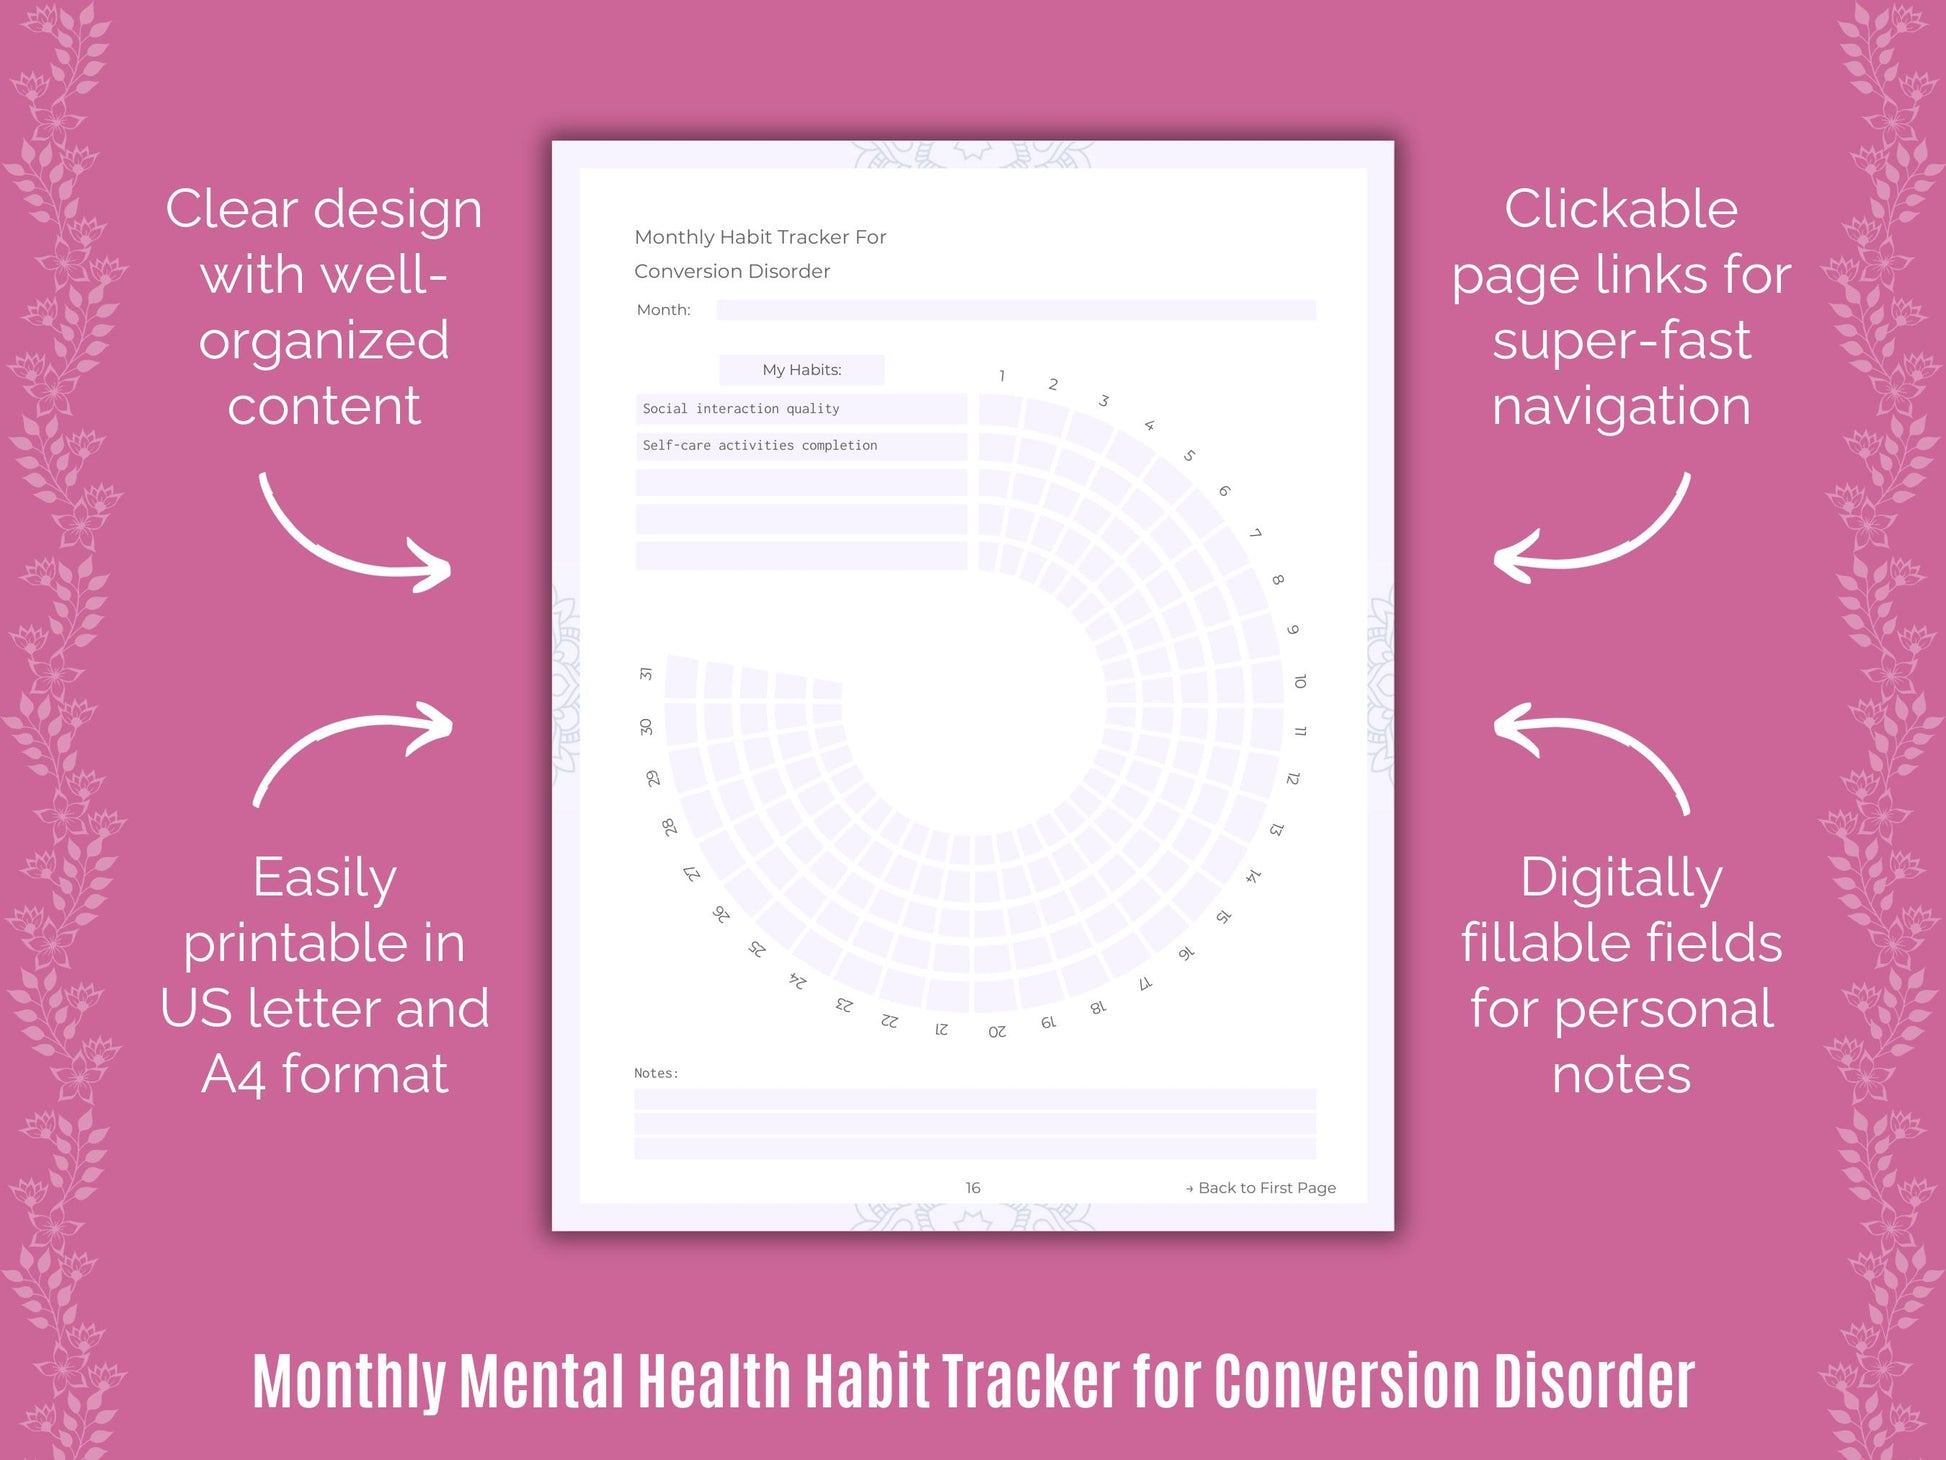 Conversion Therapy, Conversion Mental Health, Goal Setting, Conversion Tools, Conversion Notes, Disorder, Conversion Workbooks, Cheat Sheet, Journaling, Conversion Templates, Conversion Journals, Conversion Resources, Conversion Planners, Counseling